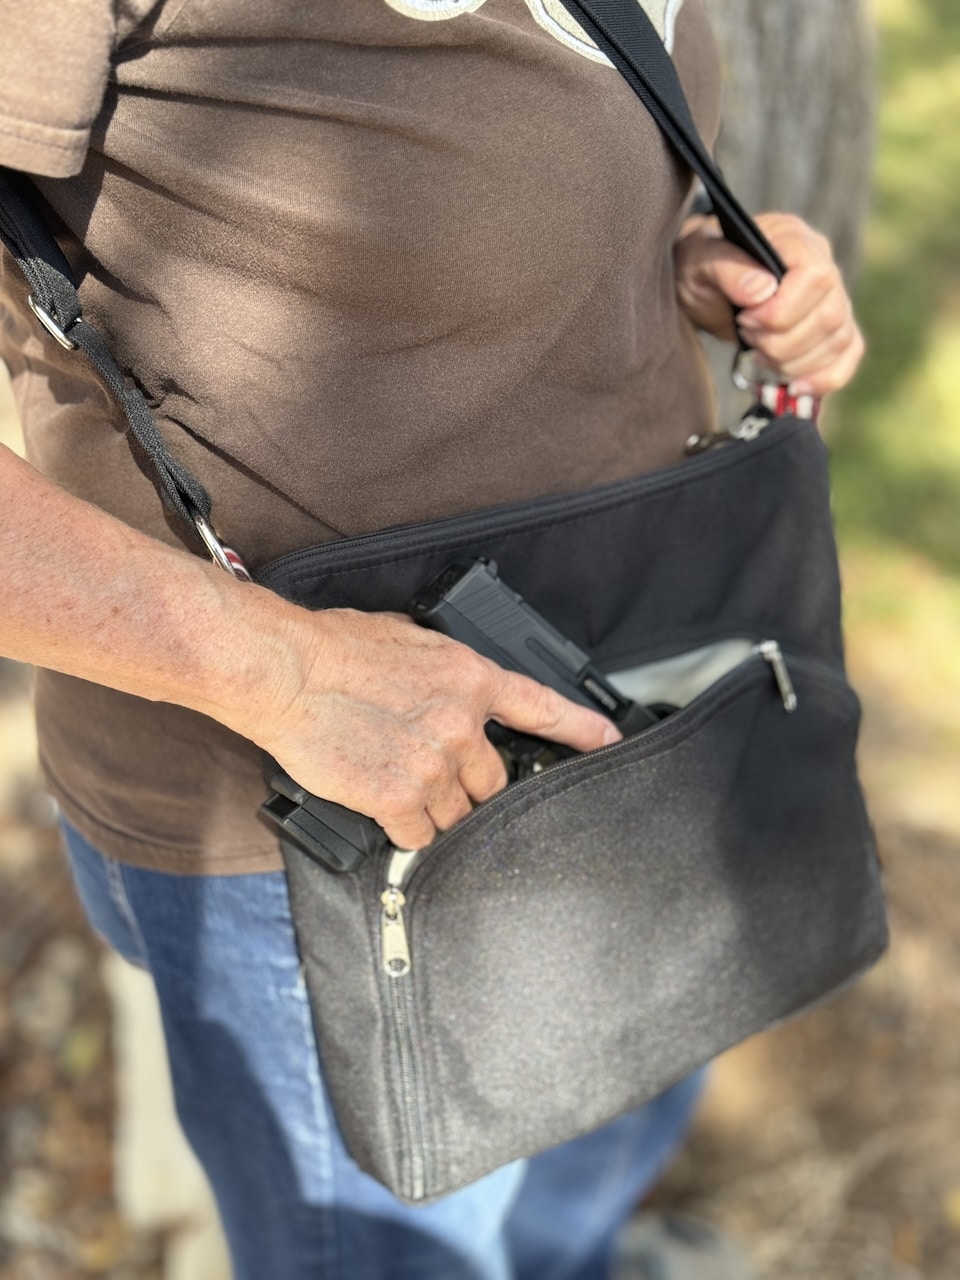 Taurus GX4 Carry TORO Compact Fits Well in CC Purse